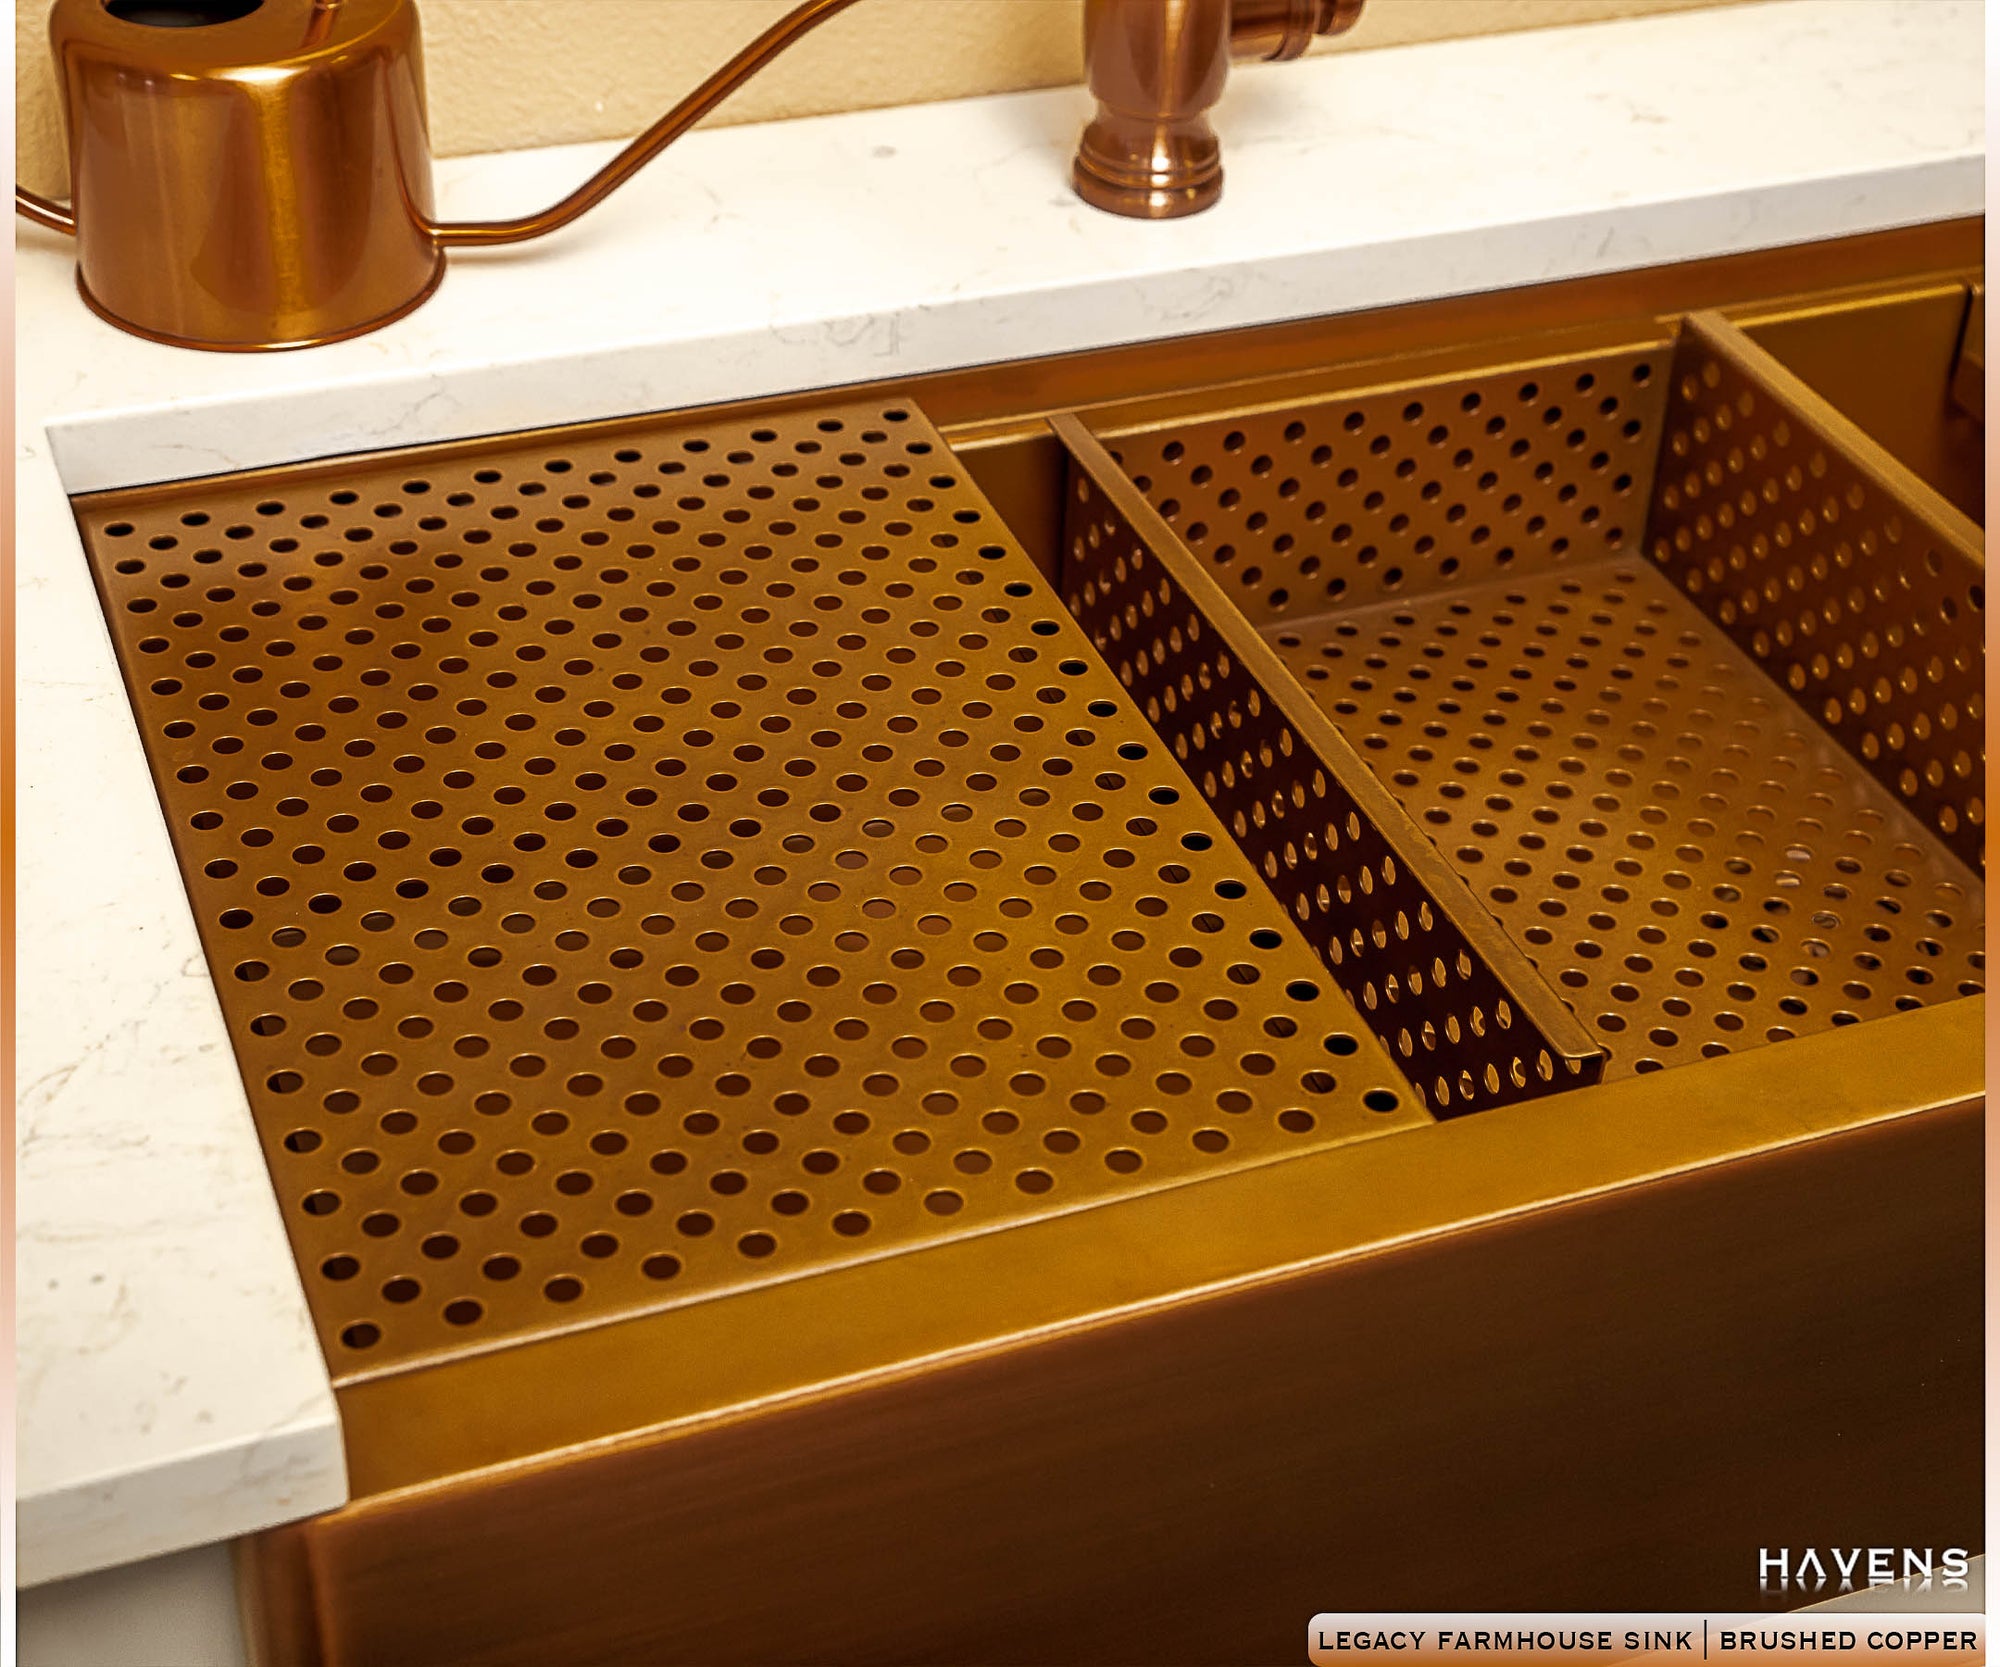 Legacy Farmhouse Sink - Brushed Copper